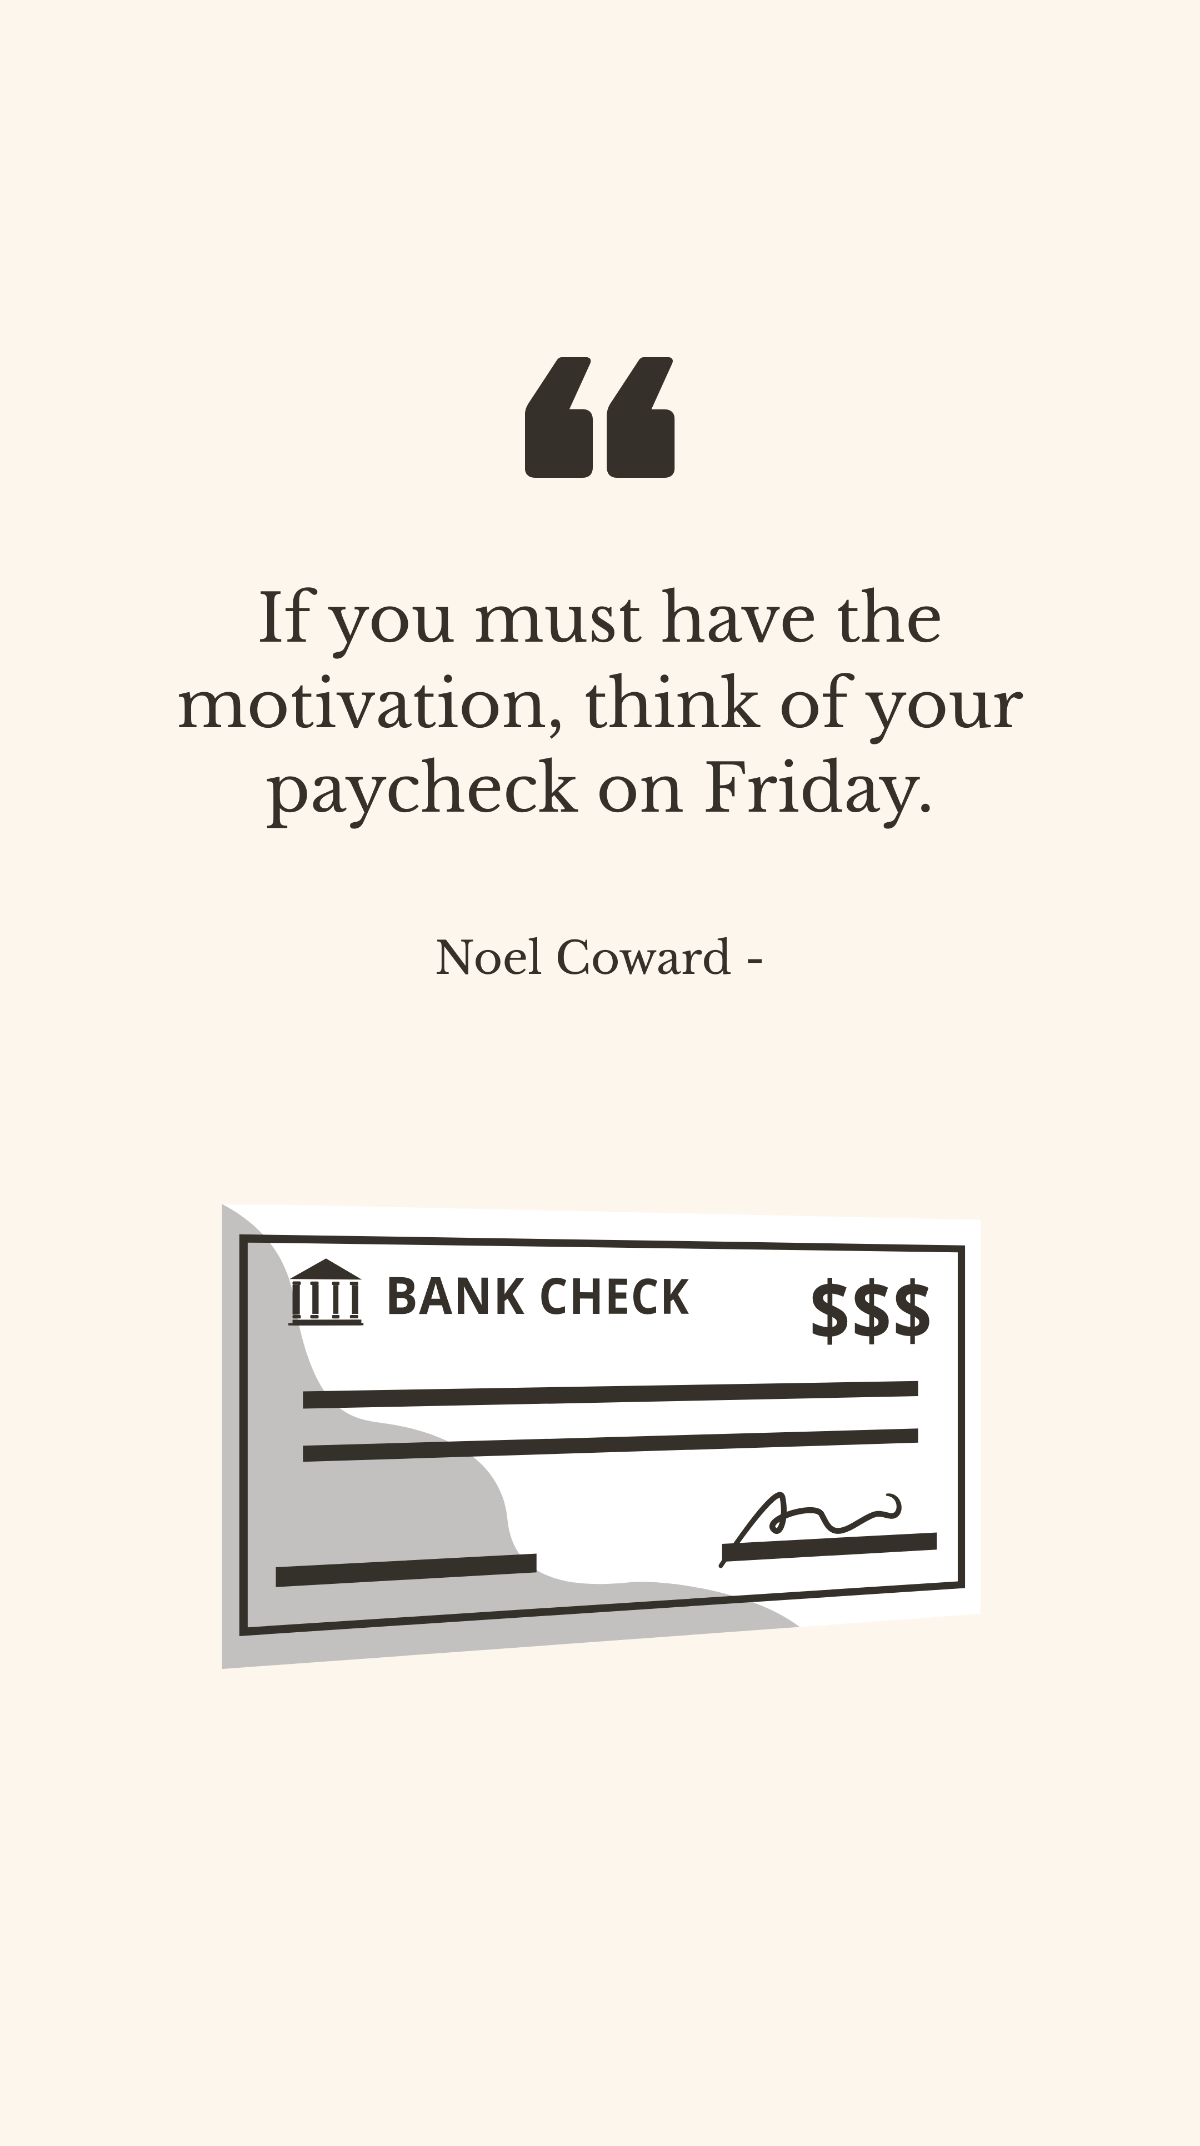 Free Noel Coward - If you must have the motivation, think of your paycheck on Friday. Template